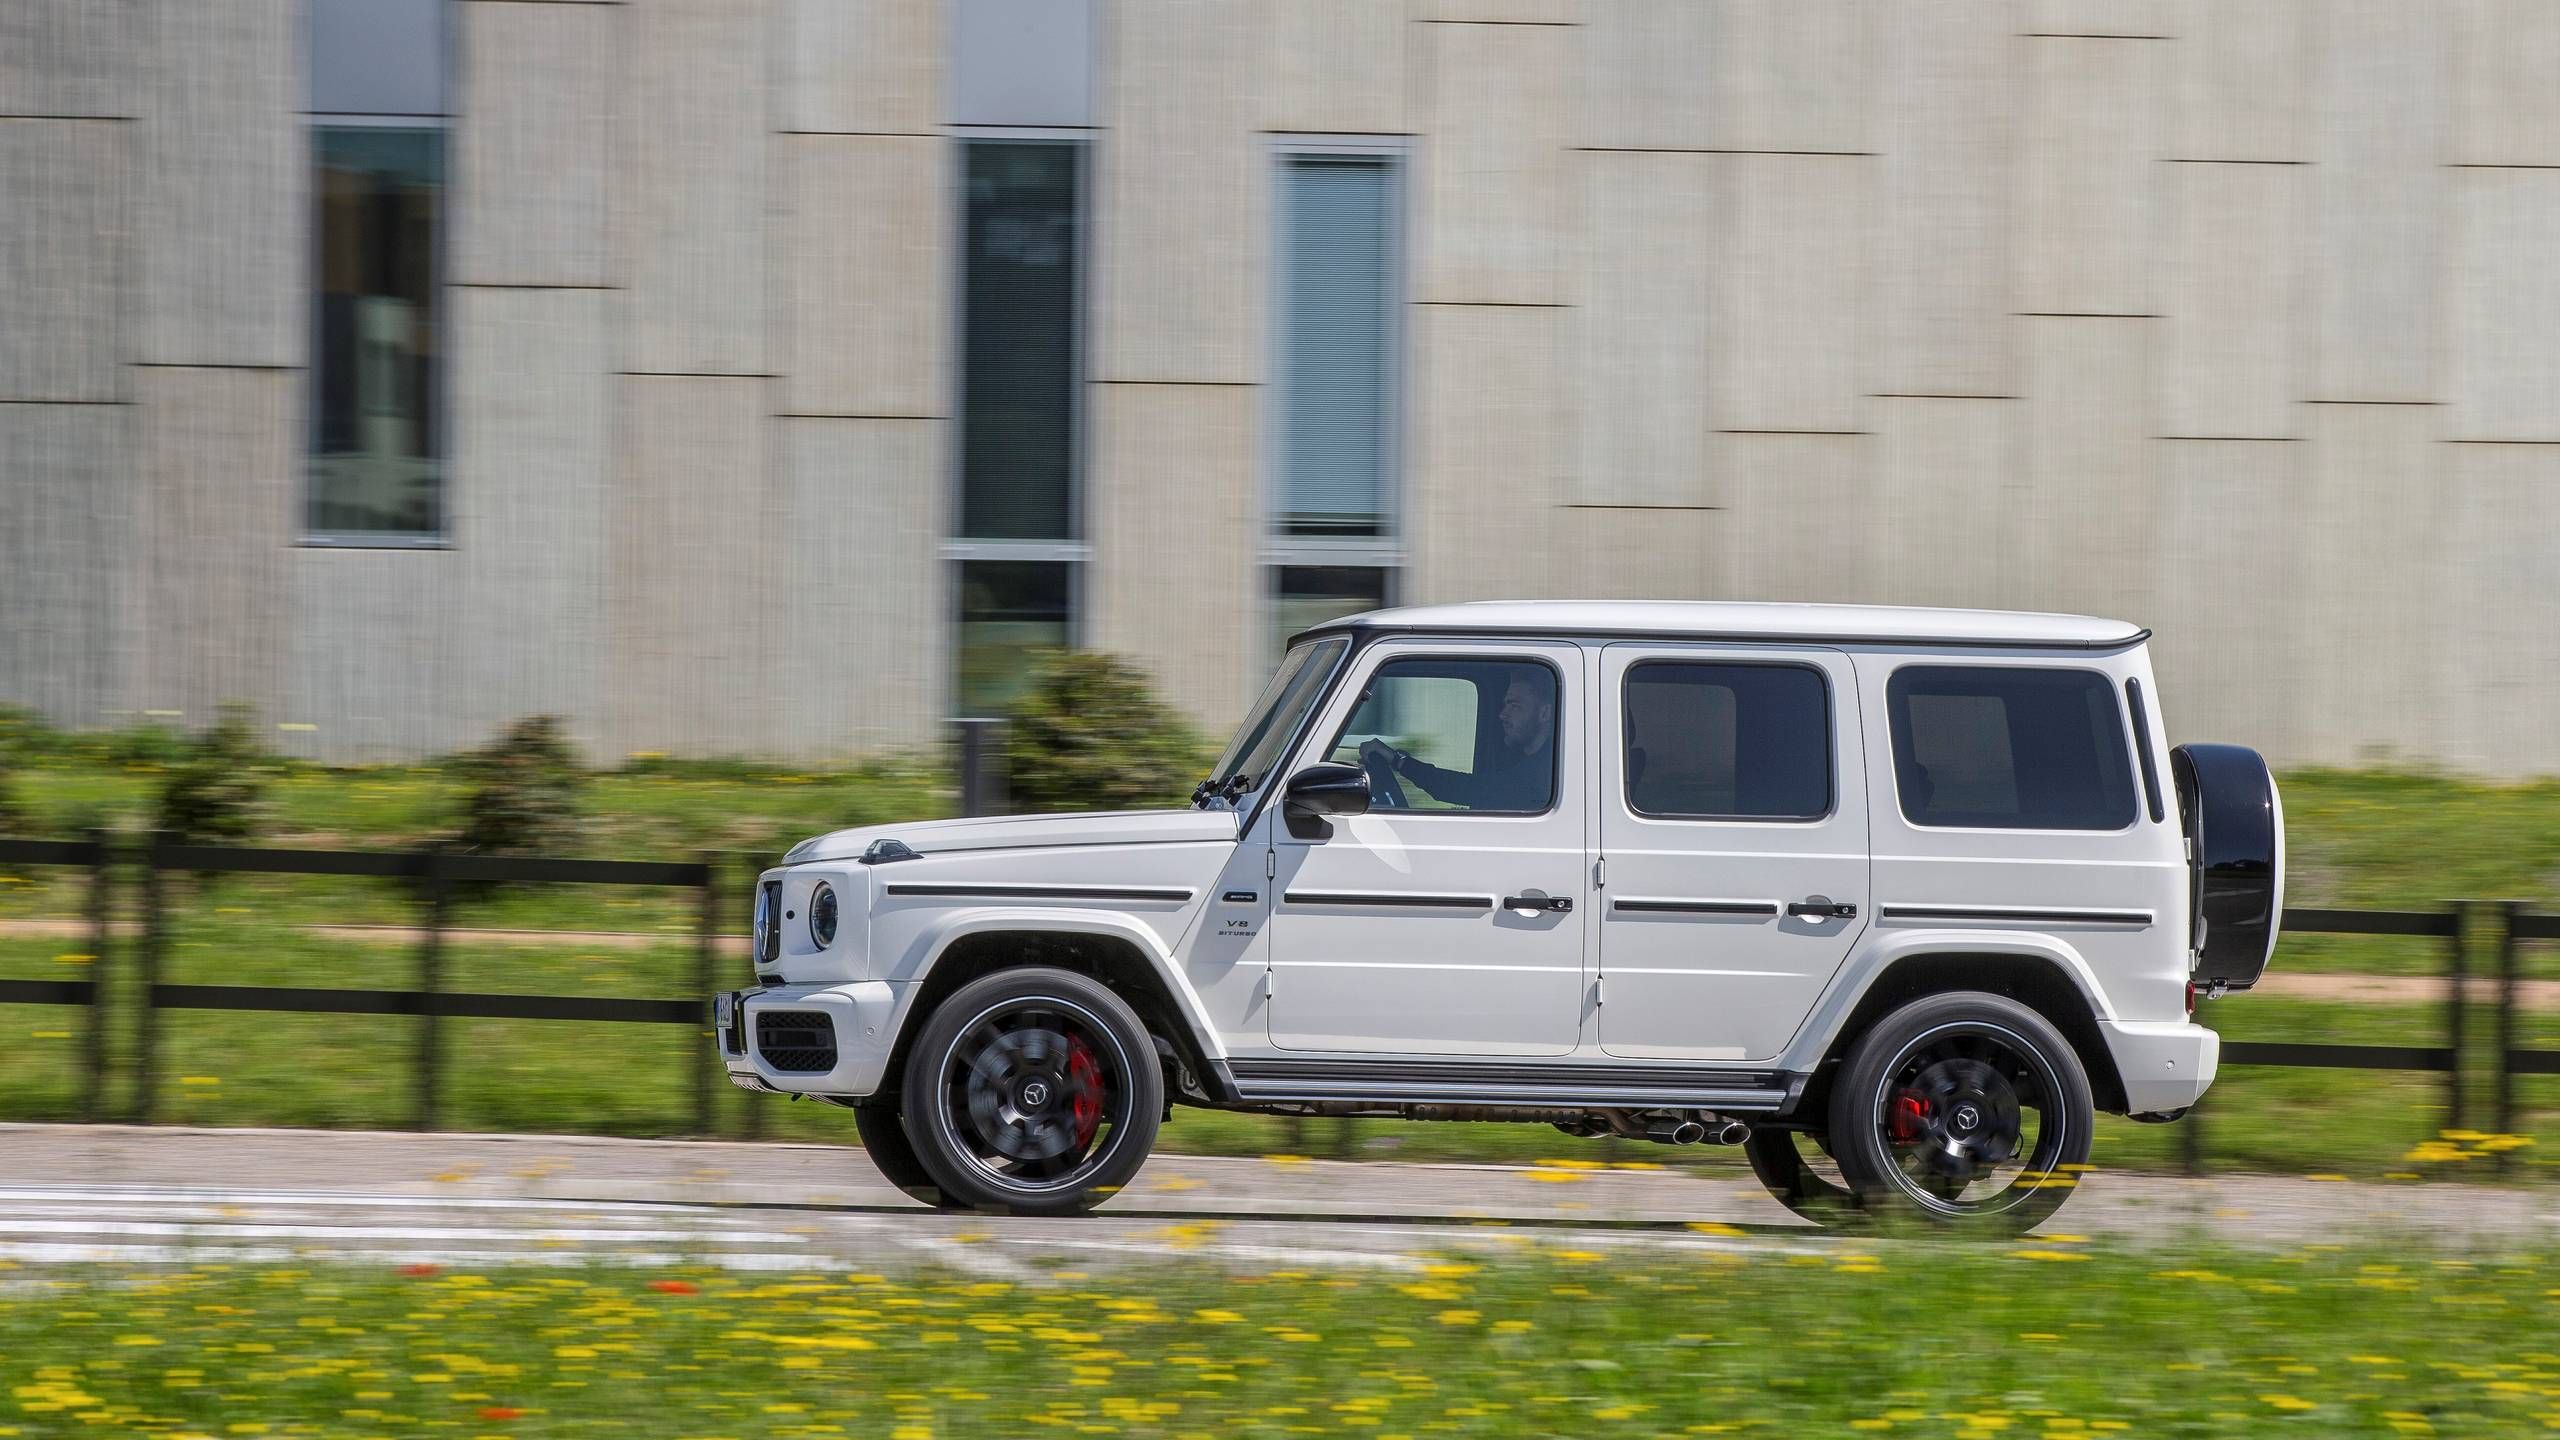 19 Mercedes Benz G Class First Drive The G Wagen Is Still Crazy After All These Years